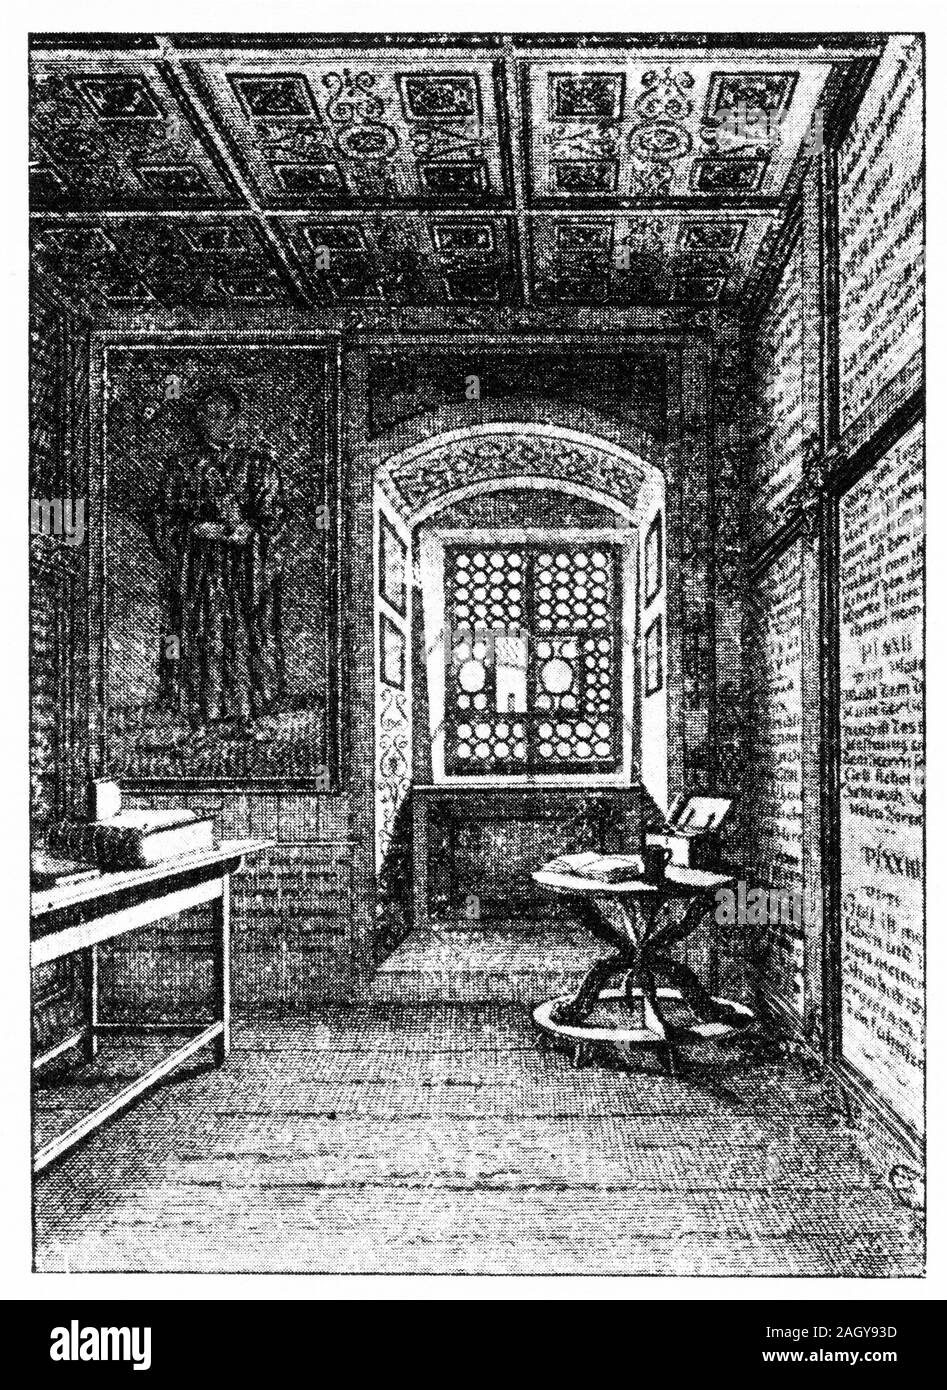 Engraving of Martin Luther's monastery room at Erfurt during his time studying law. Stock Photo